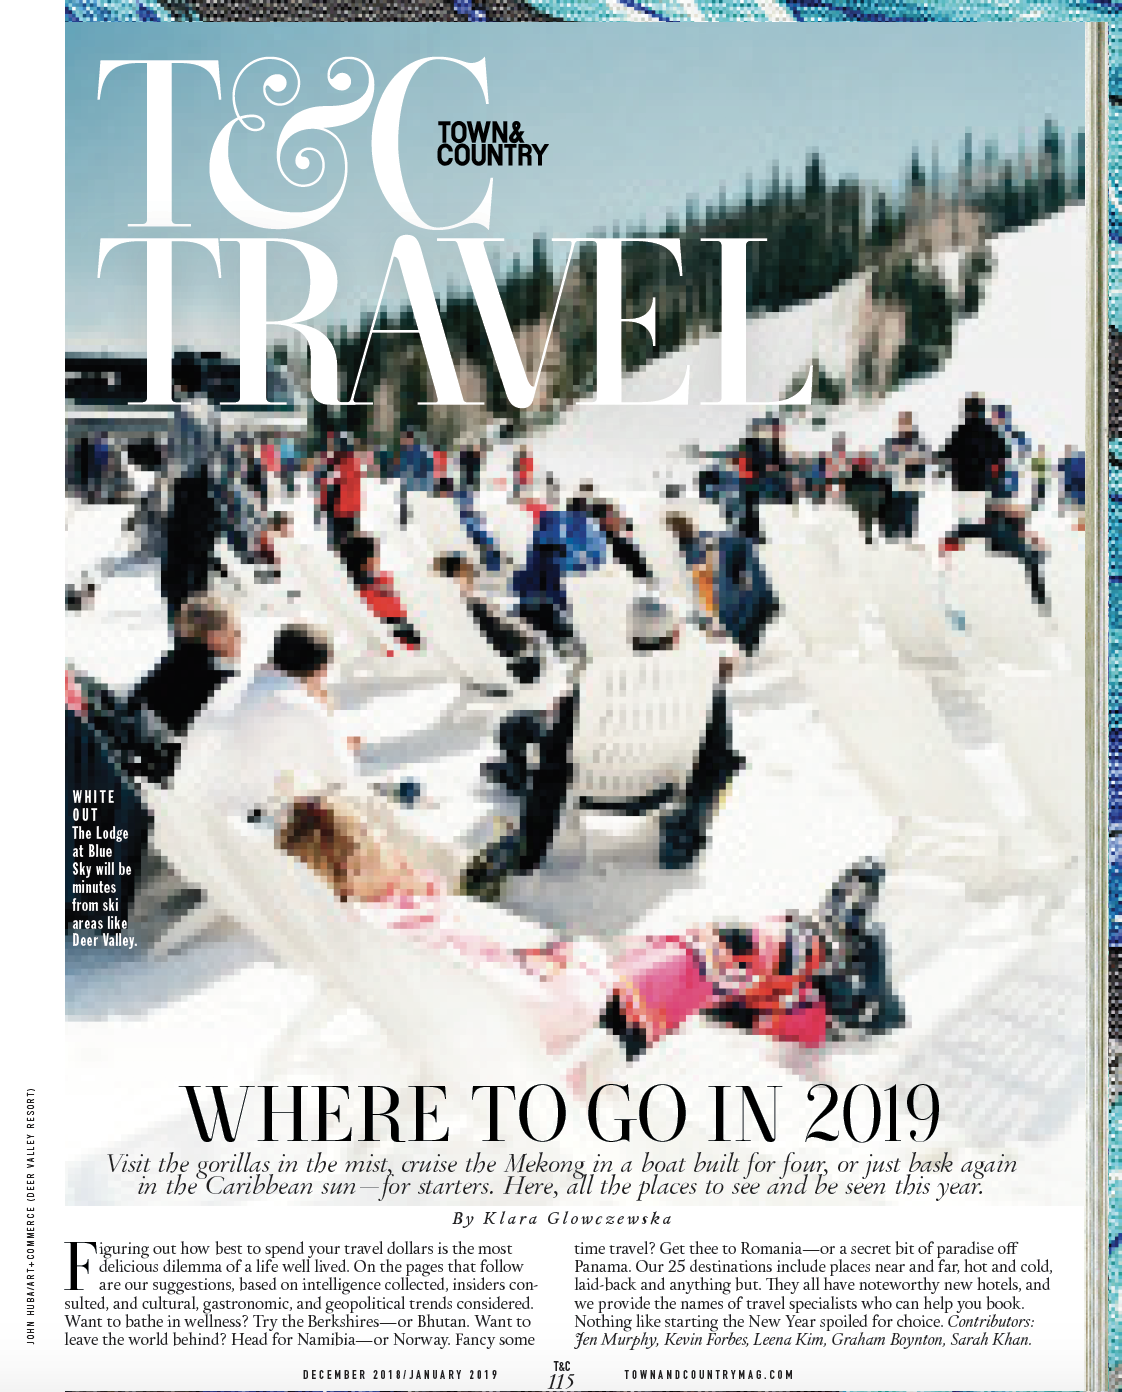 Town & Country: Where to Go in 2019